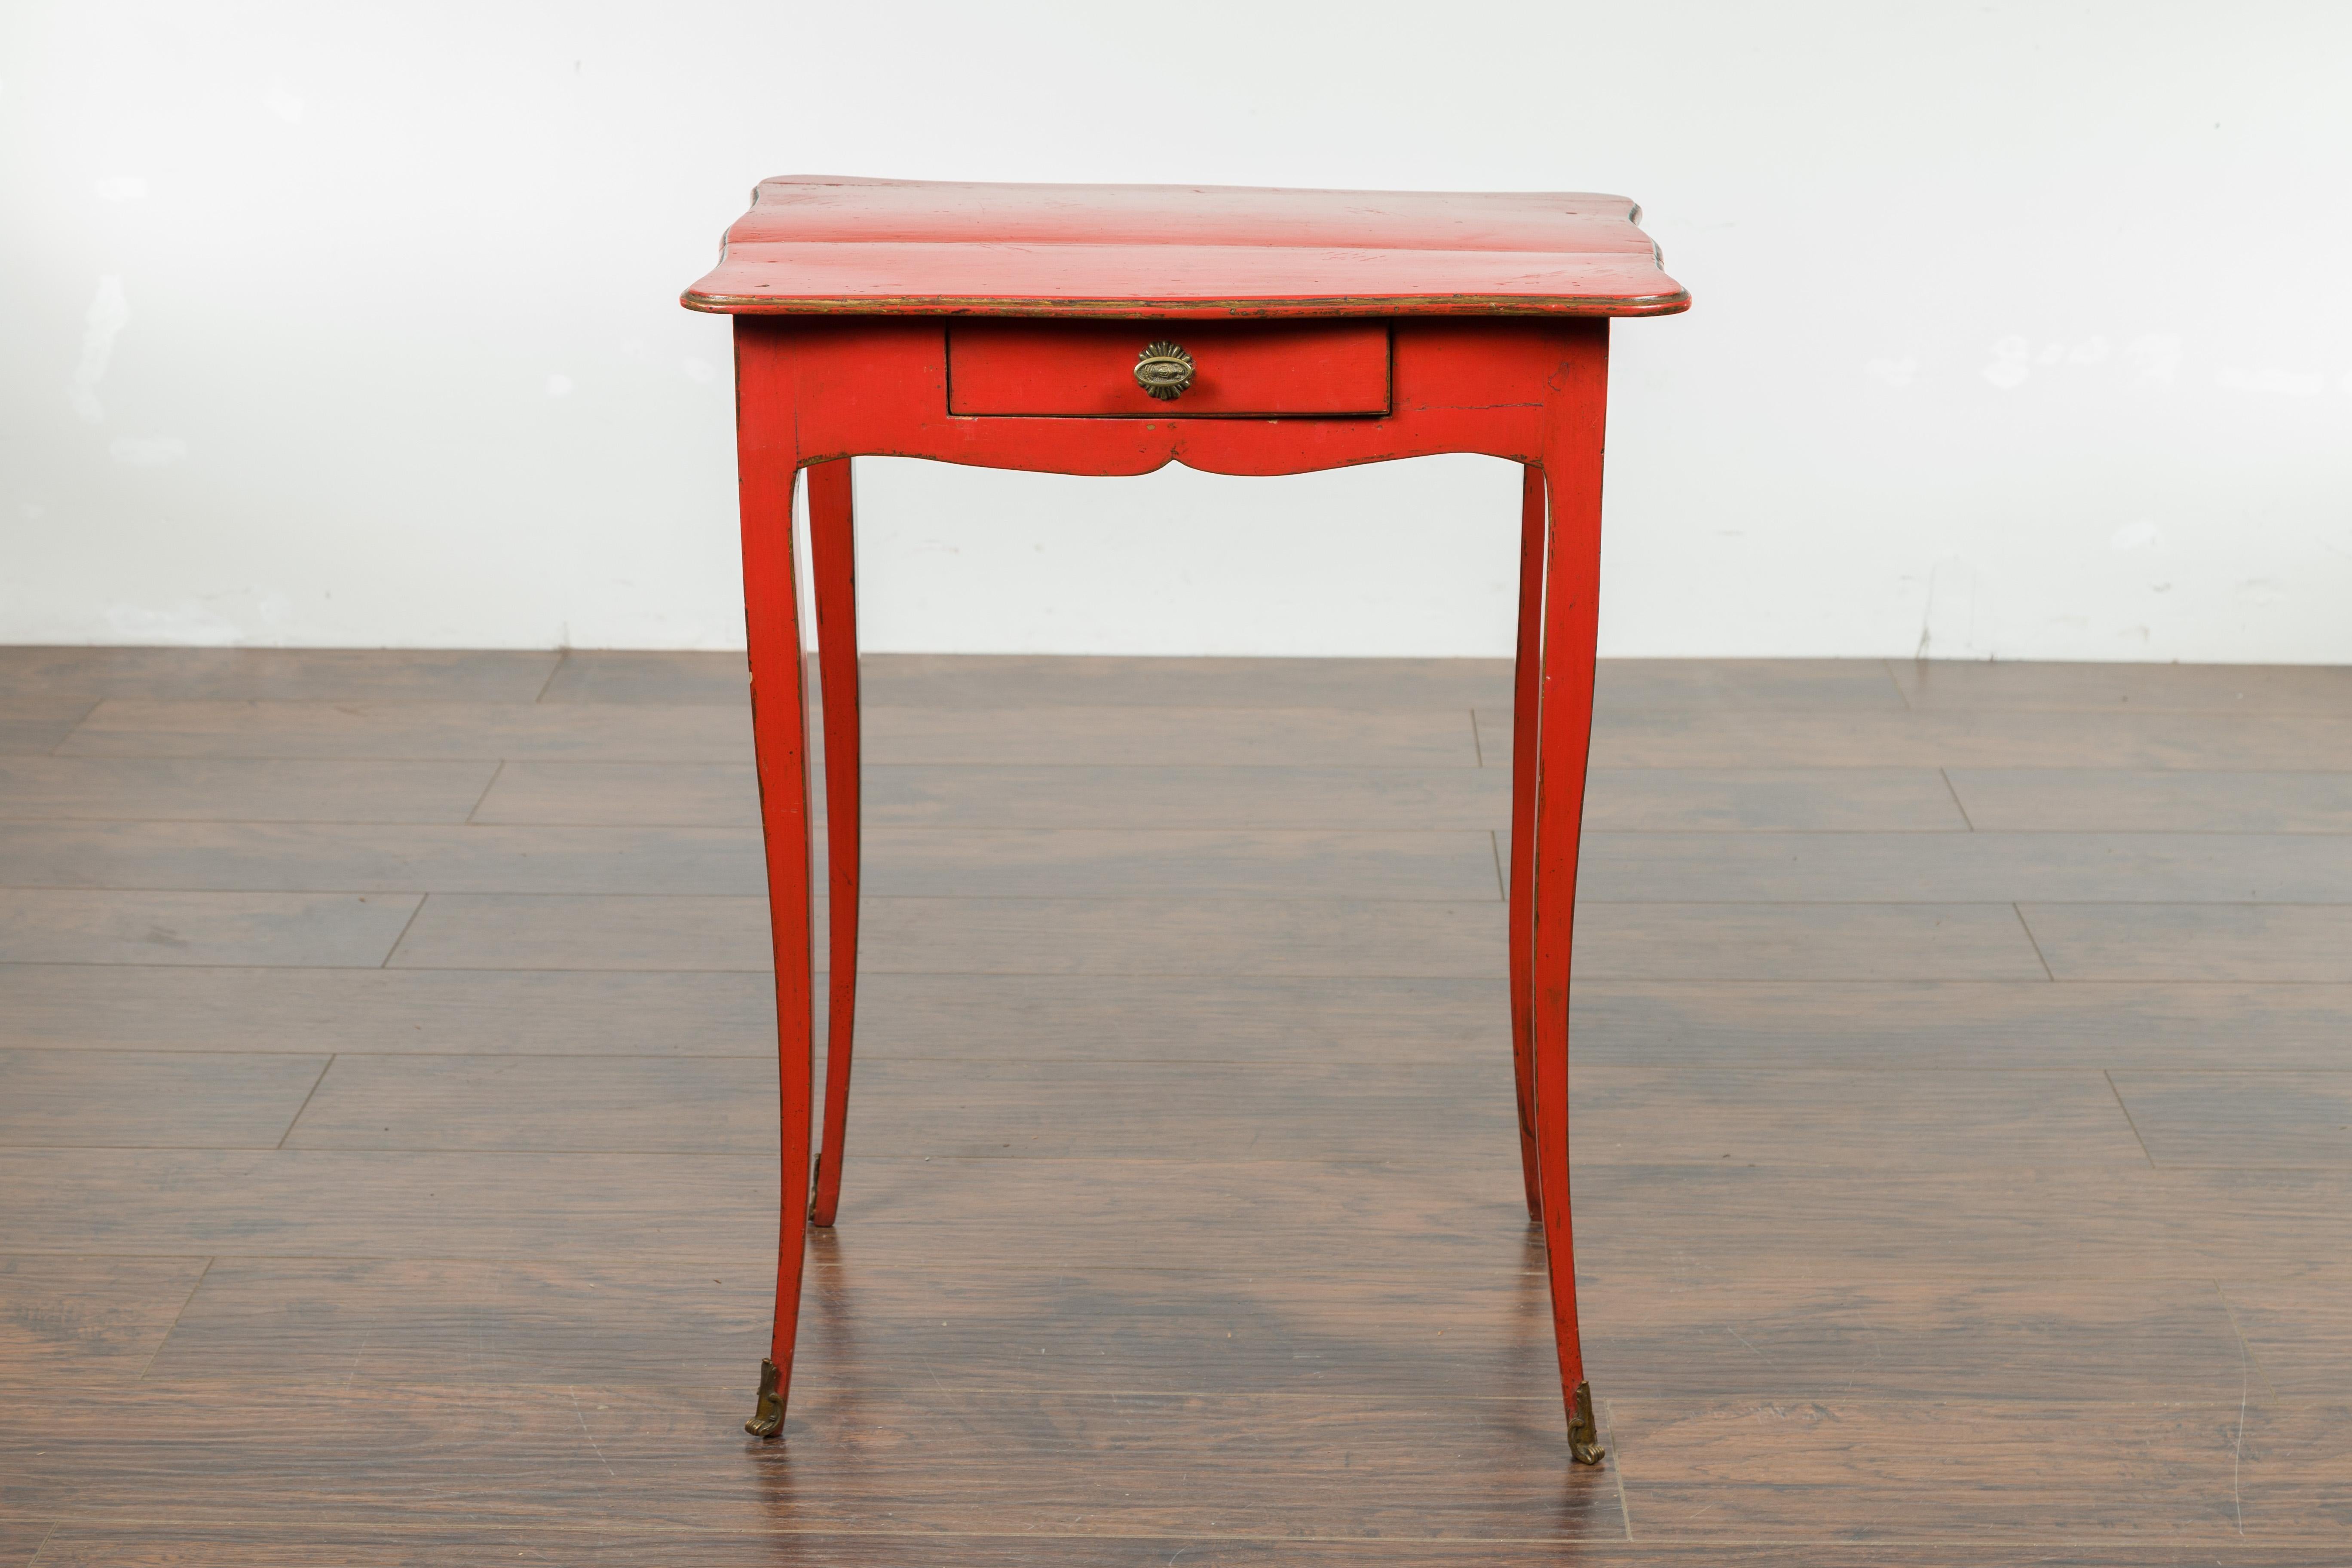 A French Restauration period red side table from the early 19th century, with curving legs and single drawer. Created in France during the first quarter of the 19th century, this red side table features a rectangular top with serpentine lines,